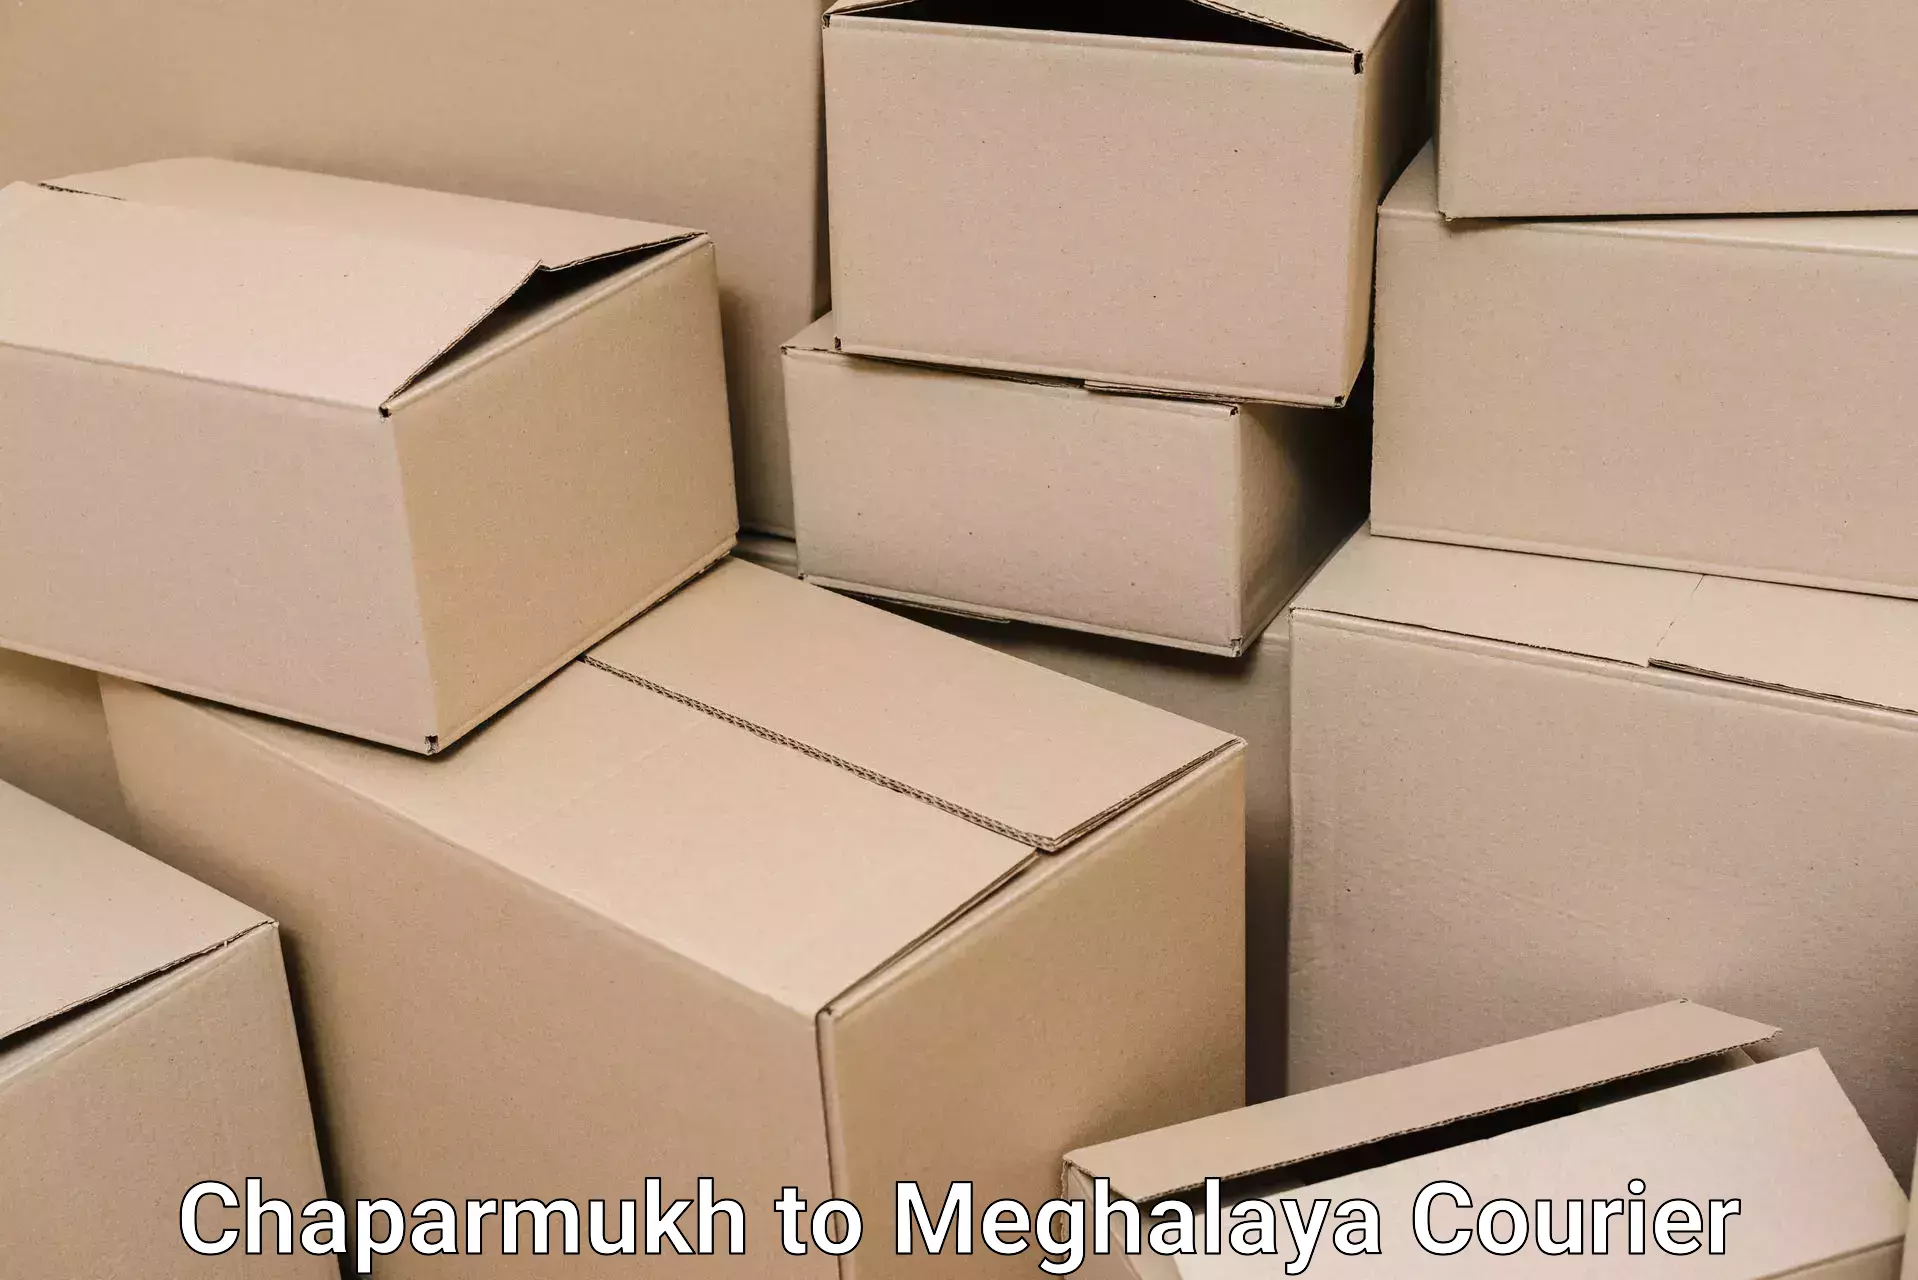 Furniture delivery service Chaparmukh to Meghalaya